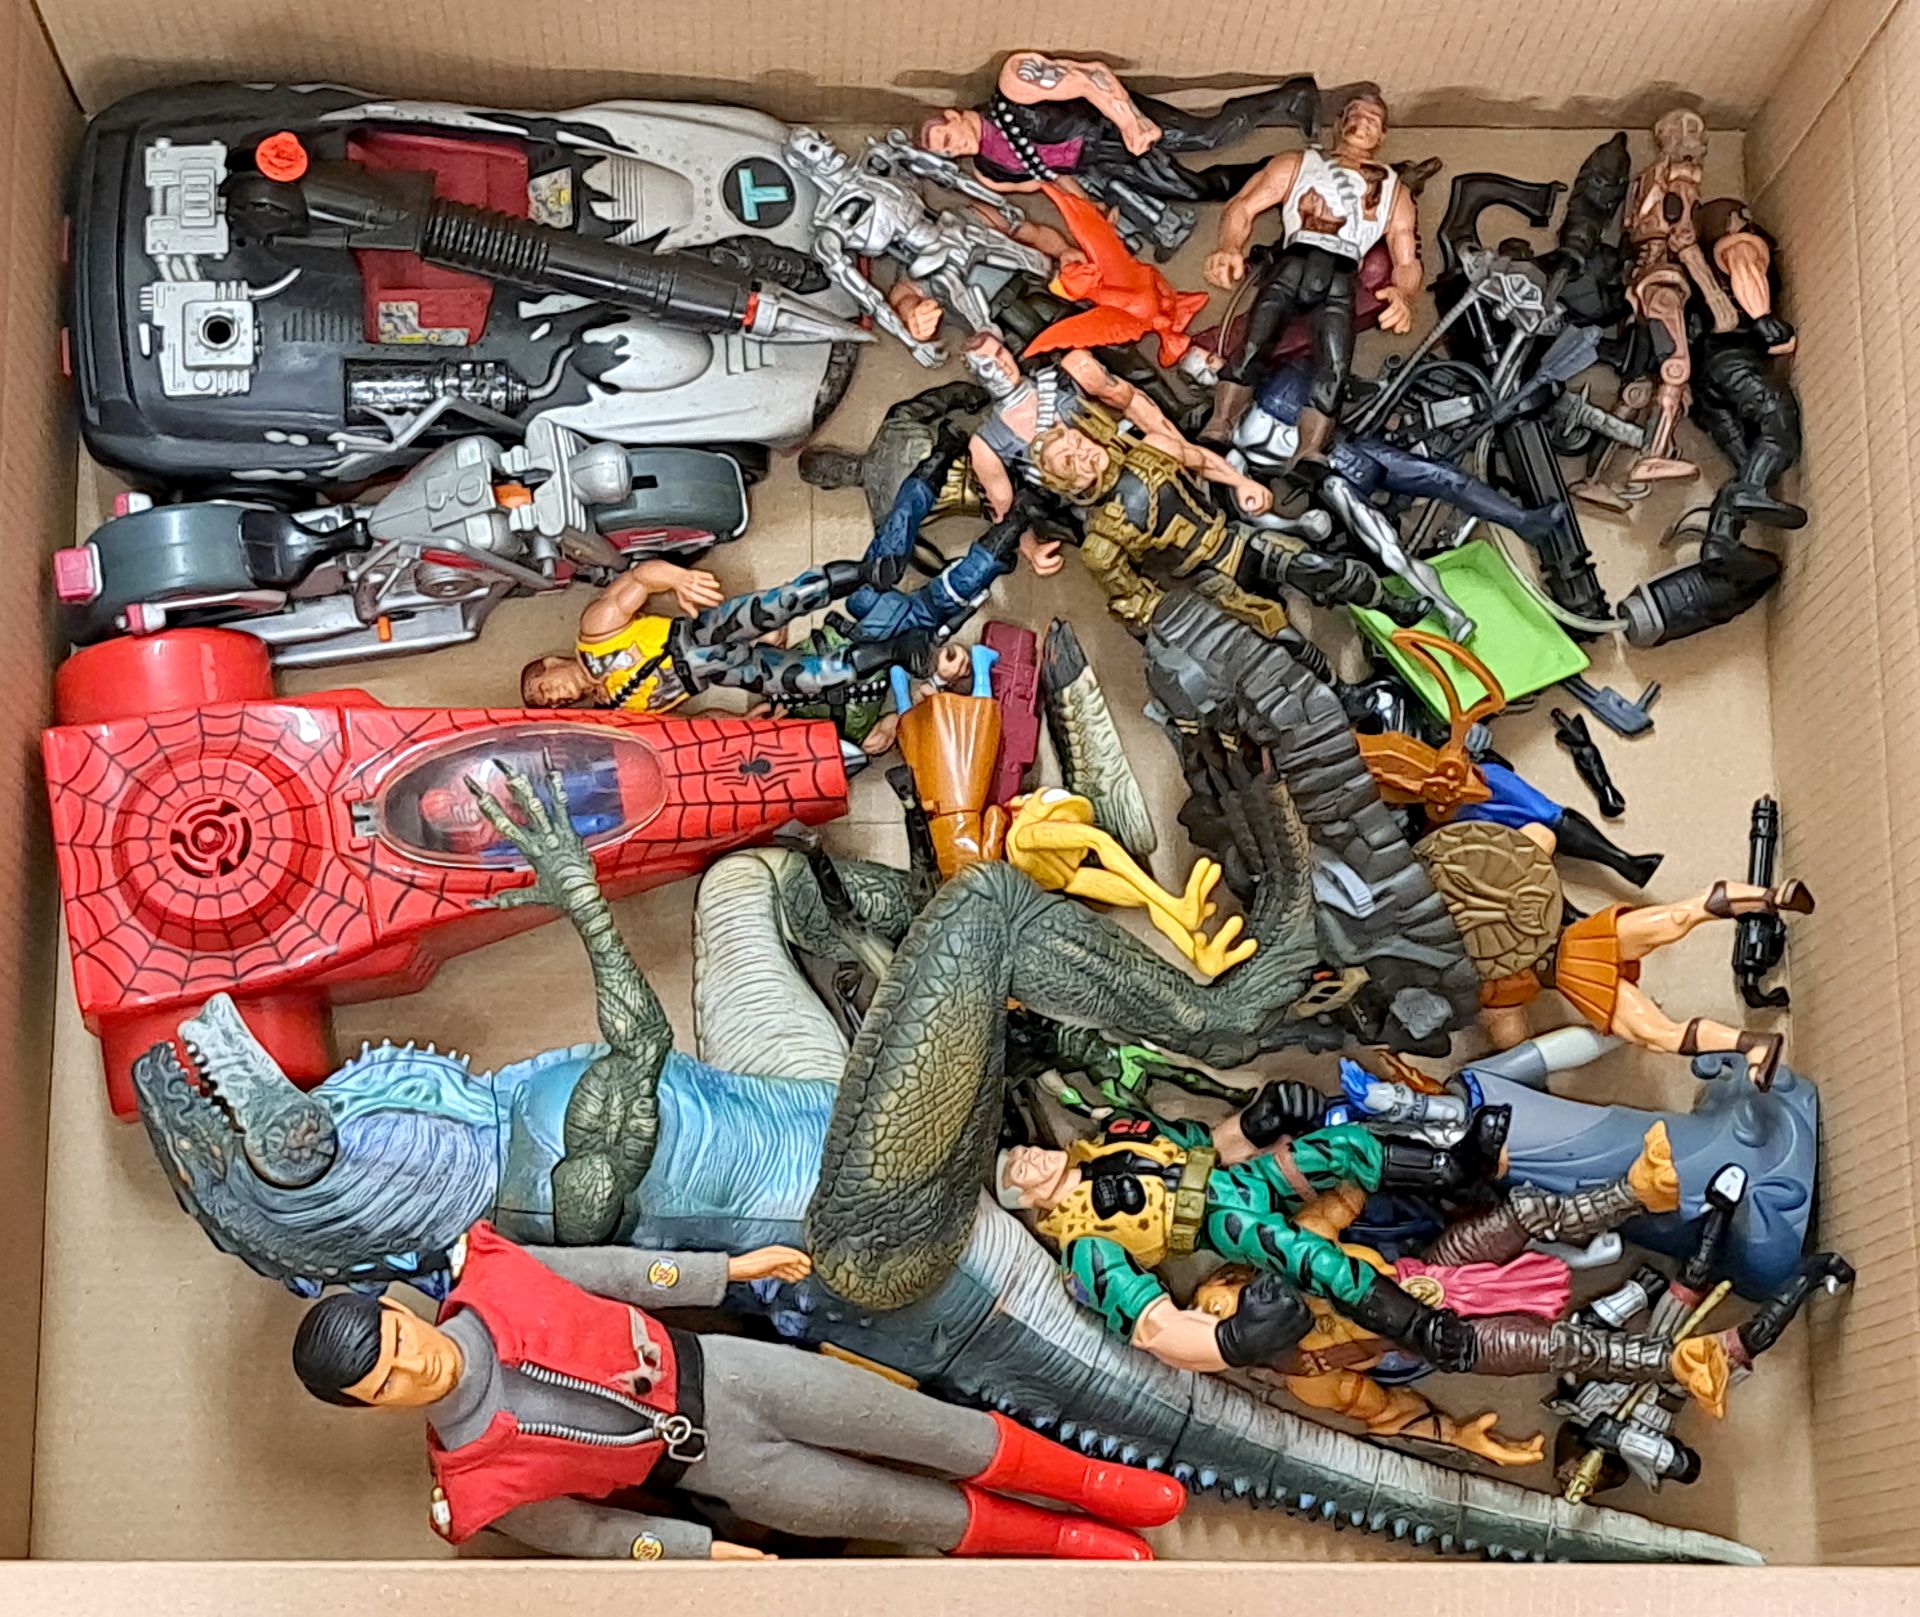 Quantity of loose action figures, vehicles & accessories